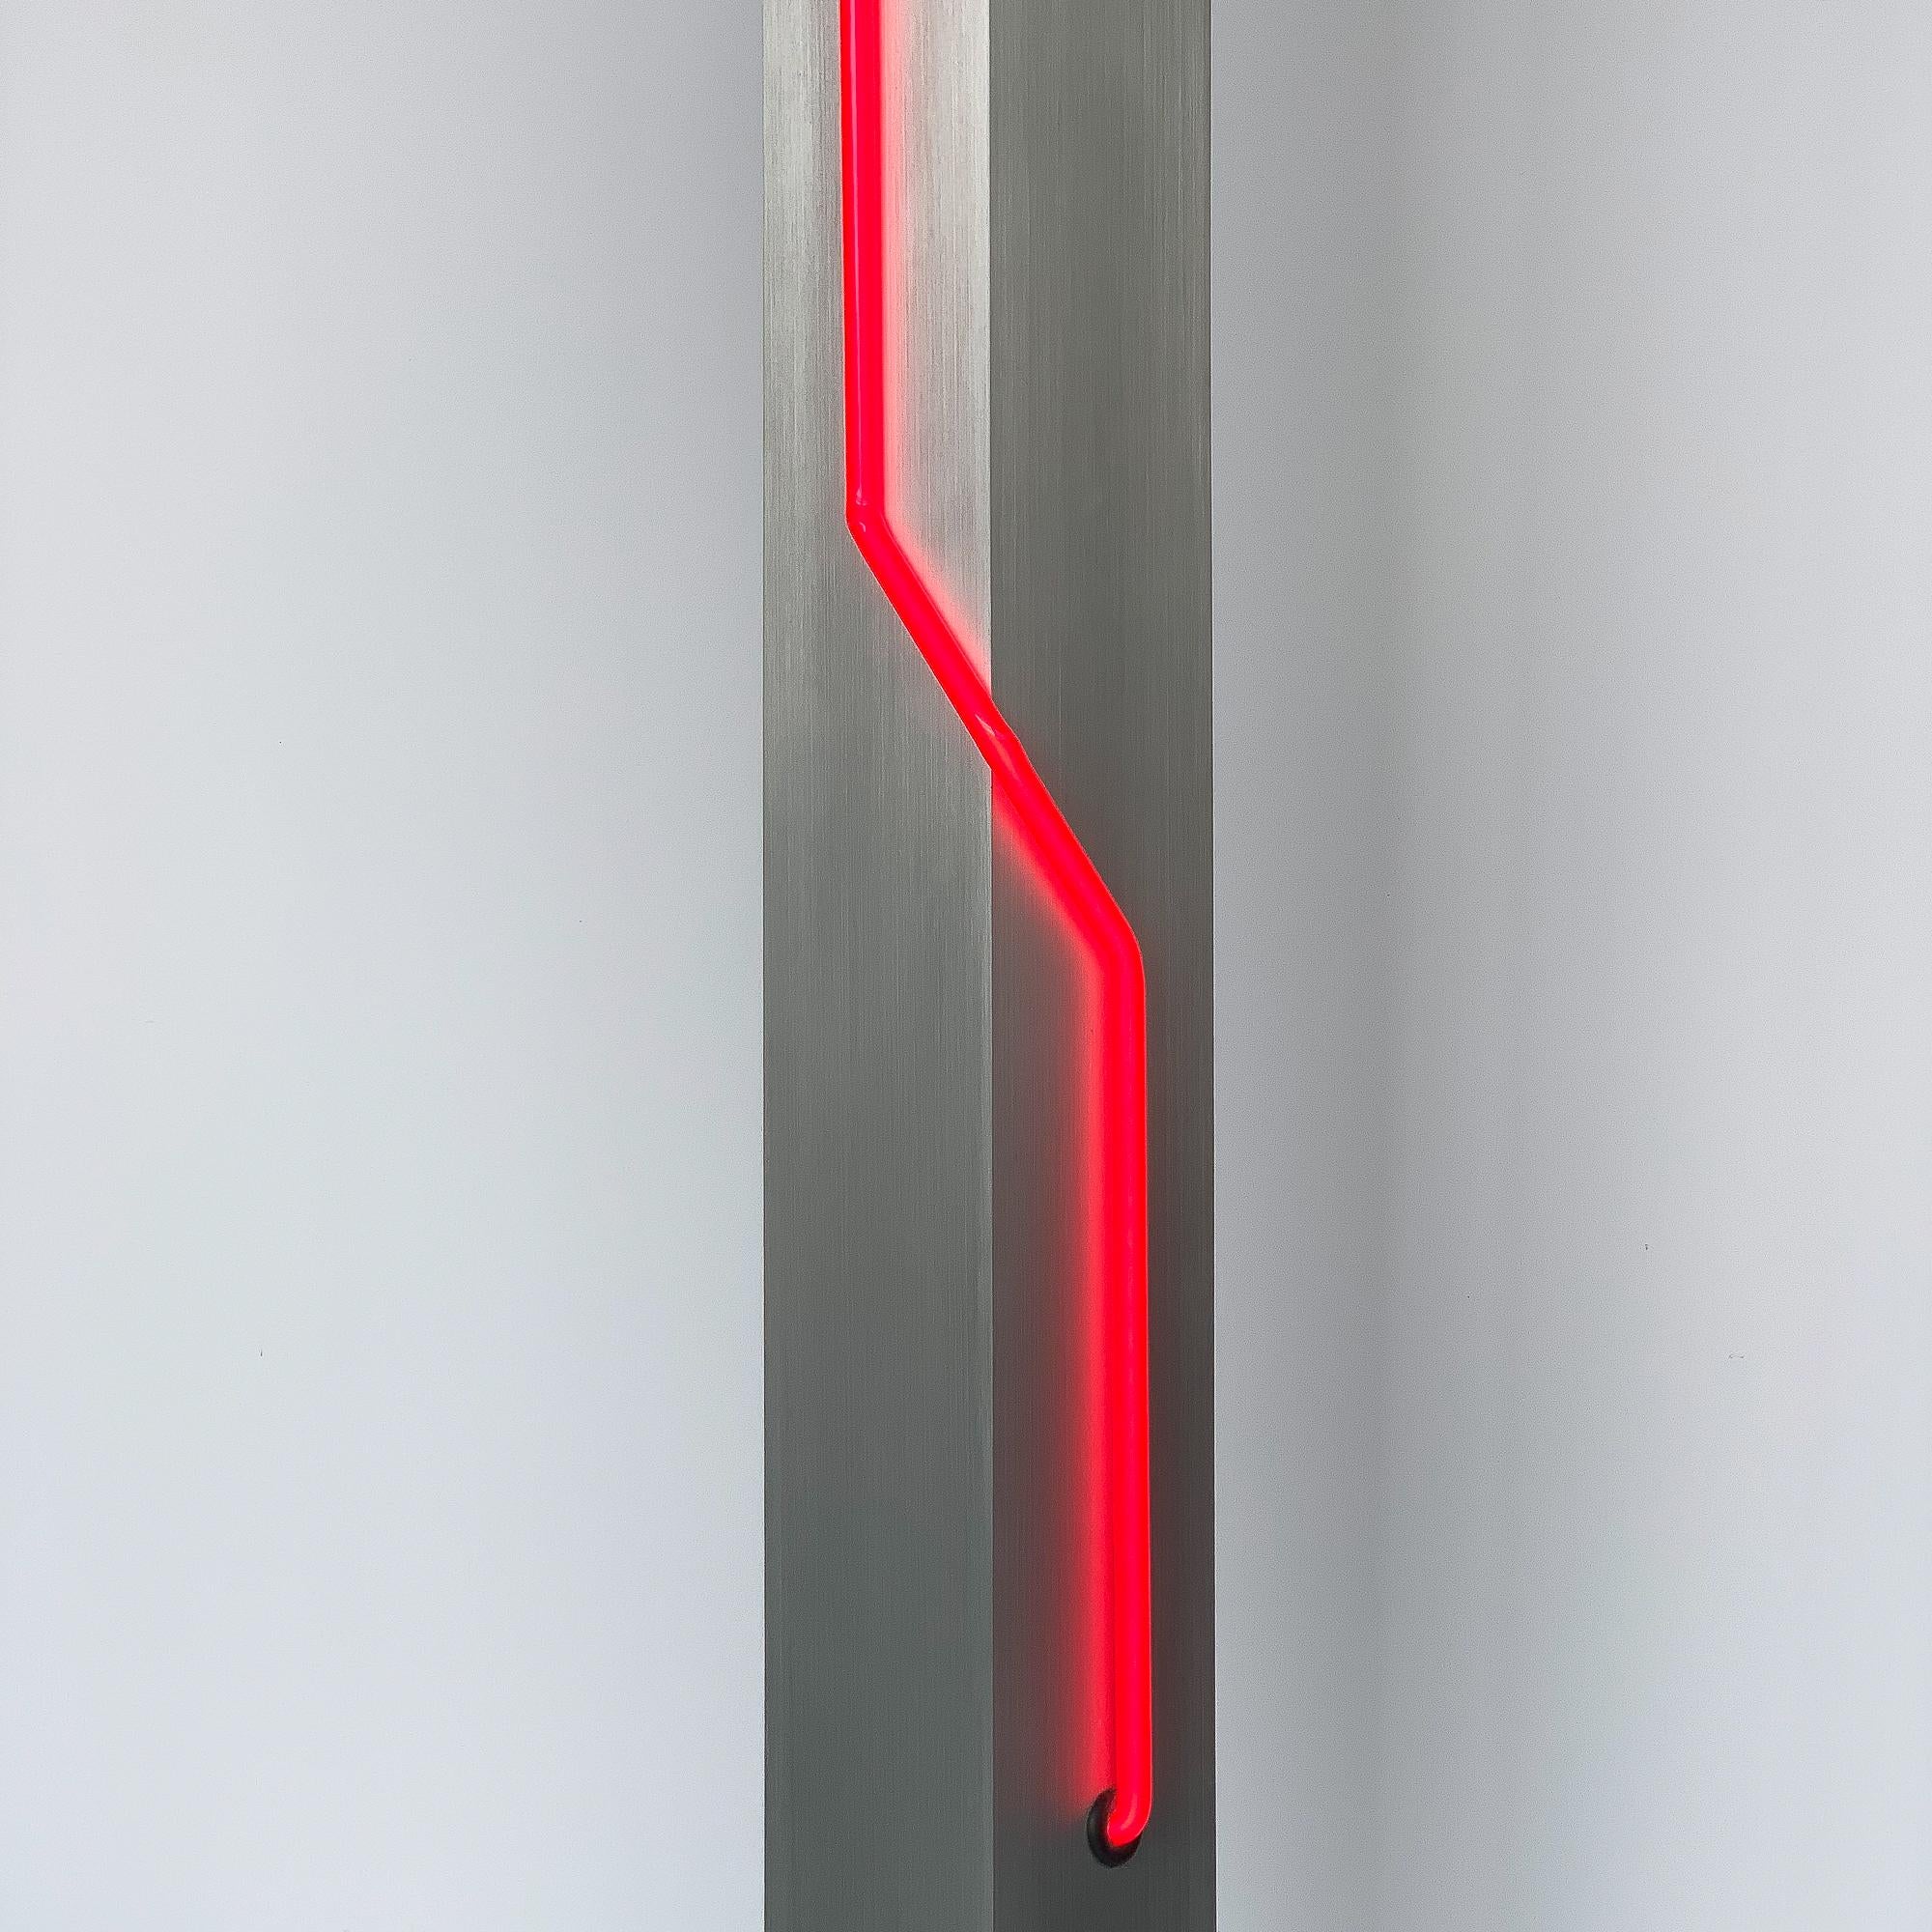 Post-Modern Rare Red Neon and Aluminum Floor Lamp by Rudi Stern and Don Chelsea for Kovacs